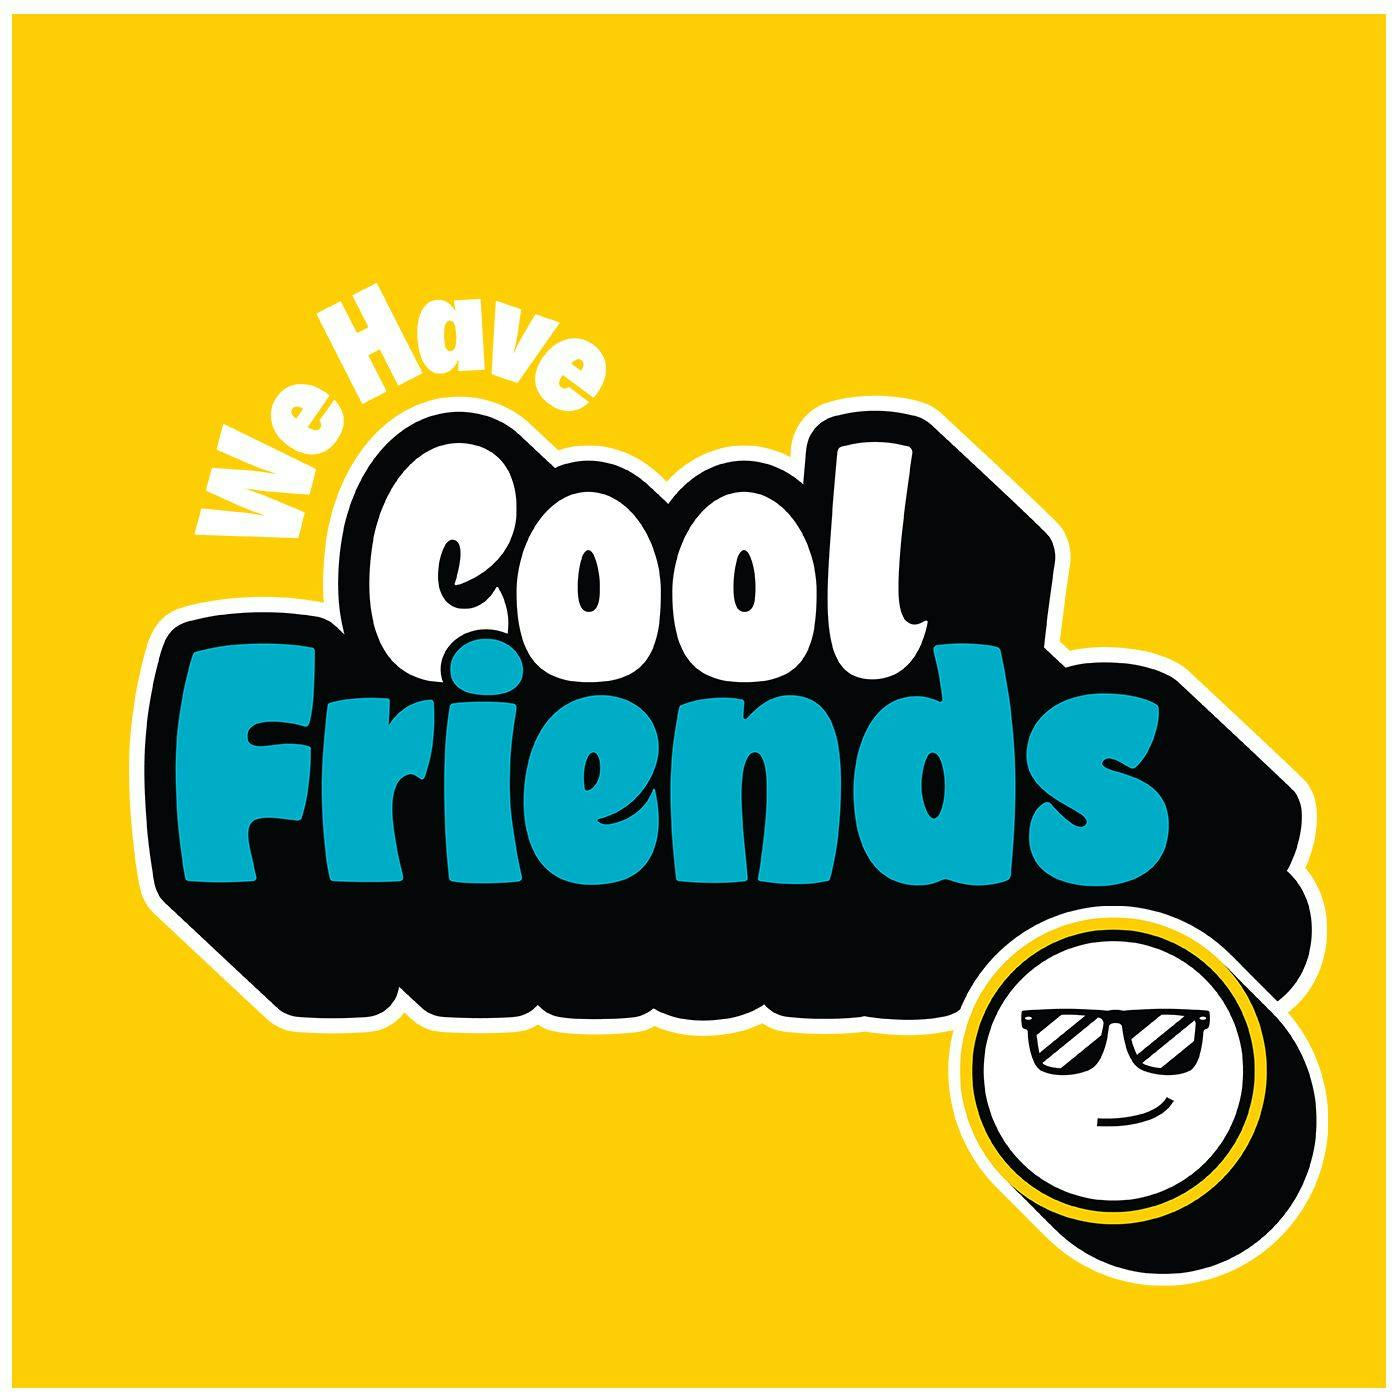 Mulan's Jimmy Wong - We Have Cool Friends